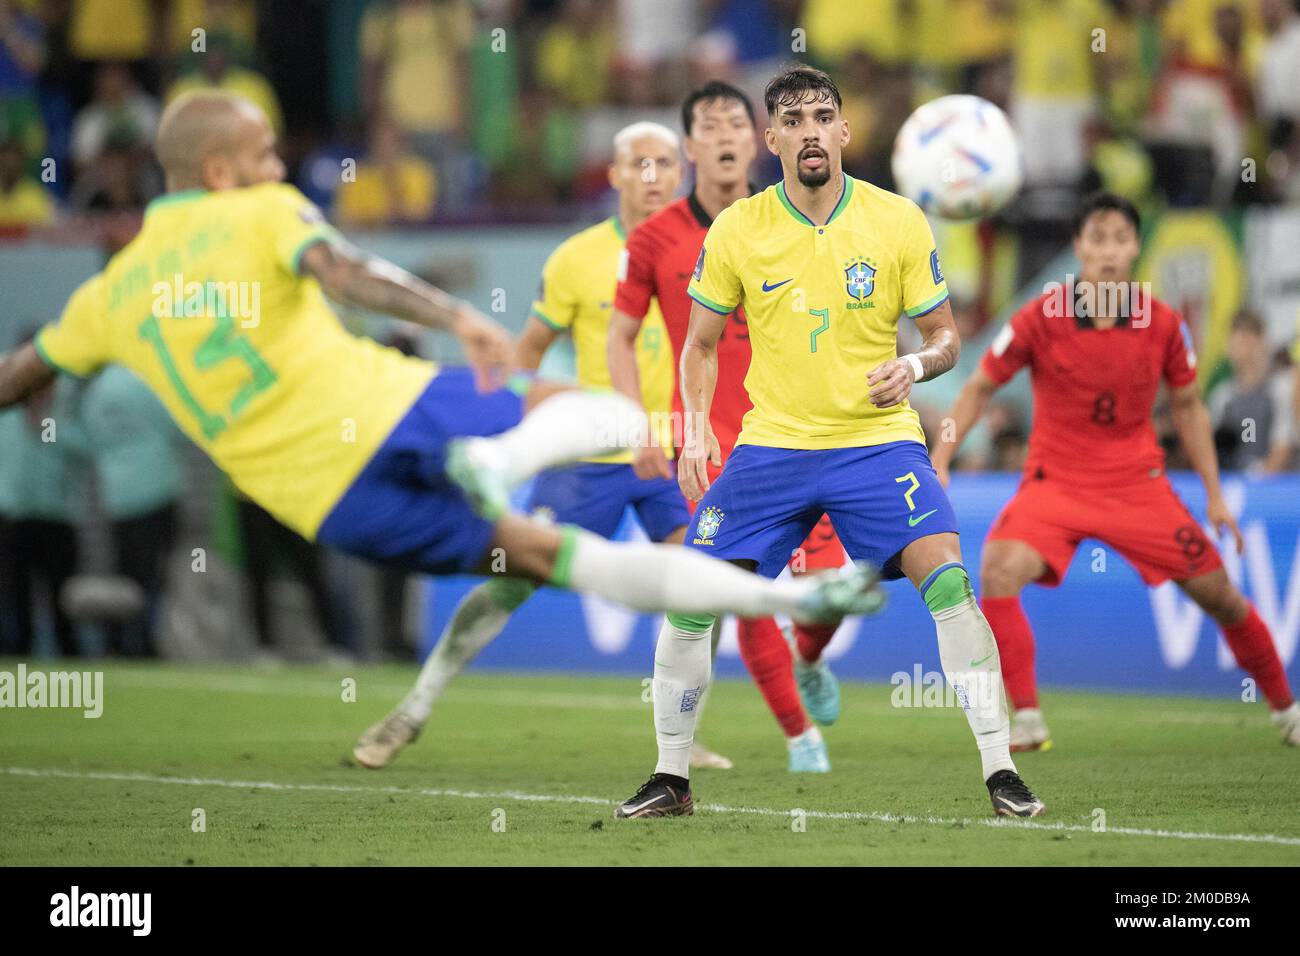 Doha, Qatar. December 05, 2022, Dani Alves and Lucas Paqueta of Brazil in action during the FIFA World Cup Qatar 2022 Round of 16 match between Brazil v Korea Republic at Stadium 974, on December 05, 2022 in Doha, Qatar. Photo by David Niviere/ABACAPRESS.COM Stock Photo